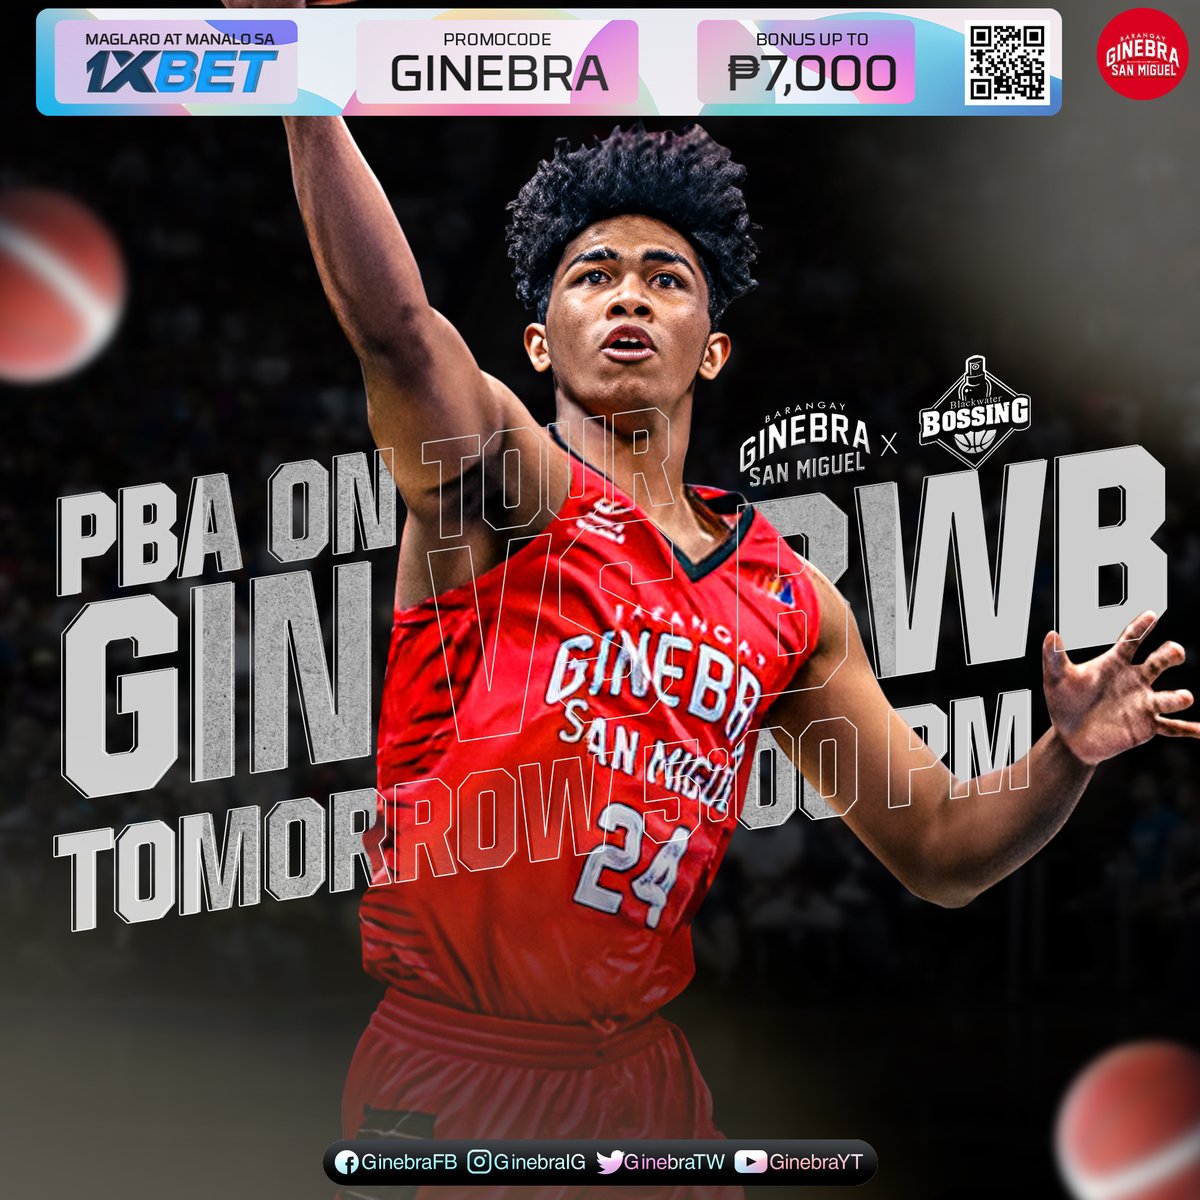 Watch our team vs Blackwater tomorrow at 5 pm at Ynares Pasig. Let’s cheer for our Gin Kings in the PBA on Tour! #NSD #Ginebra #PBAonTour